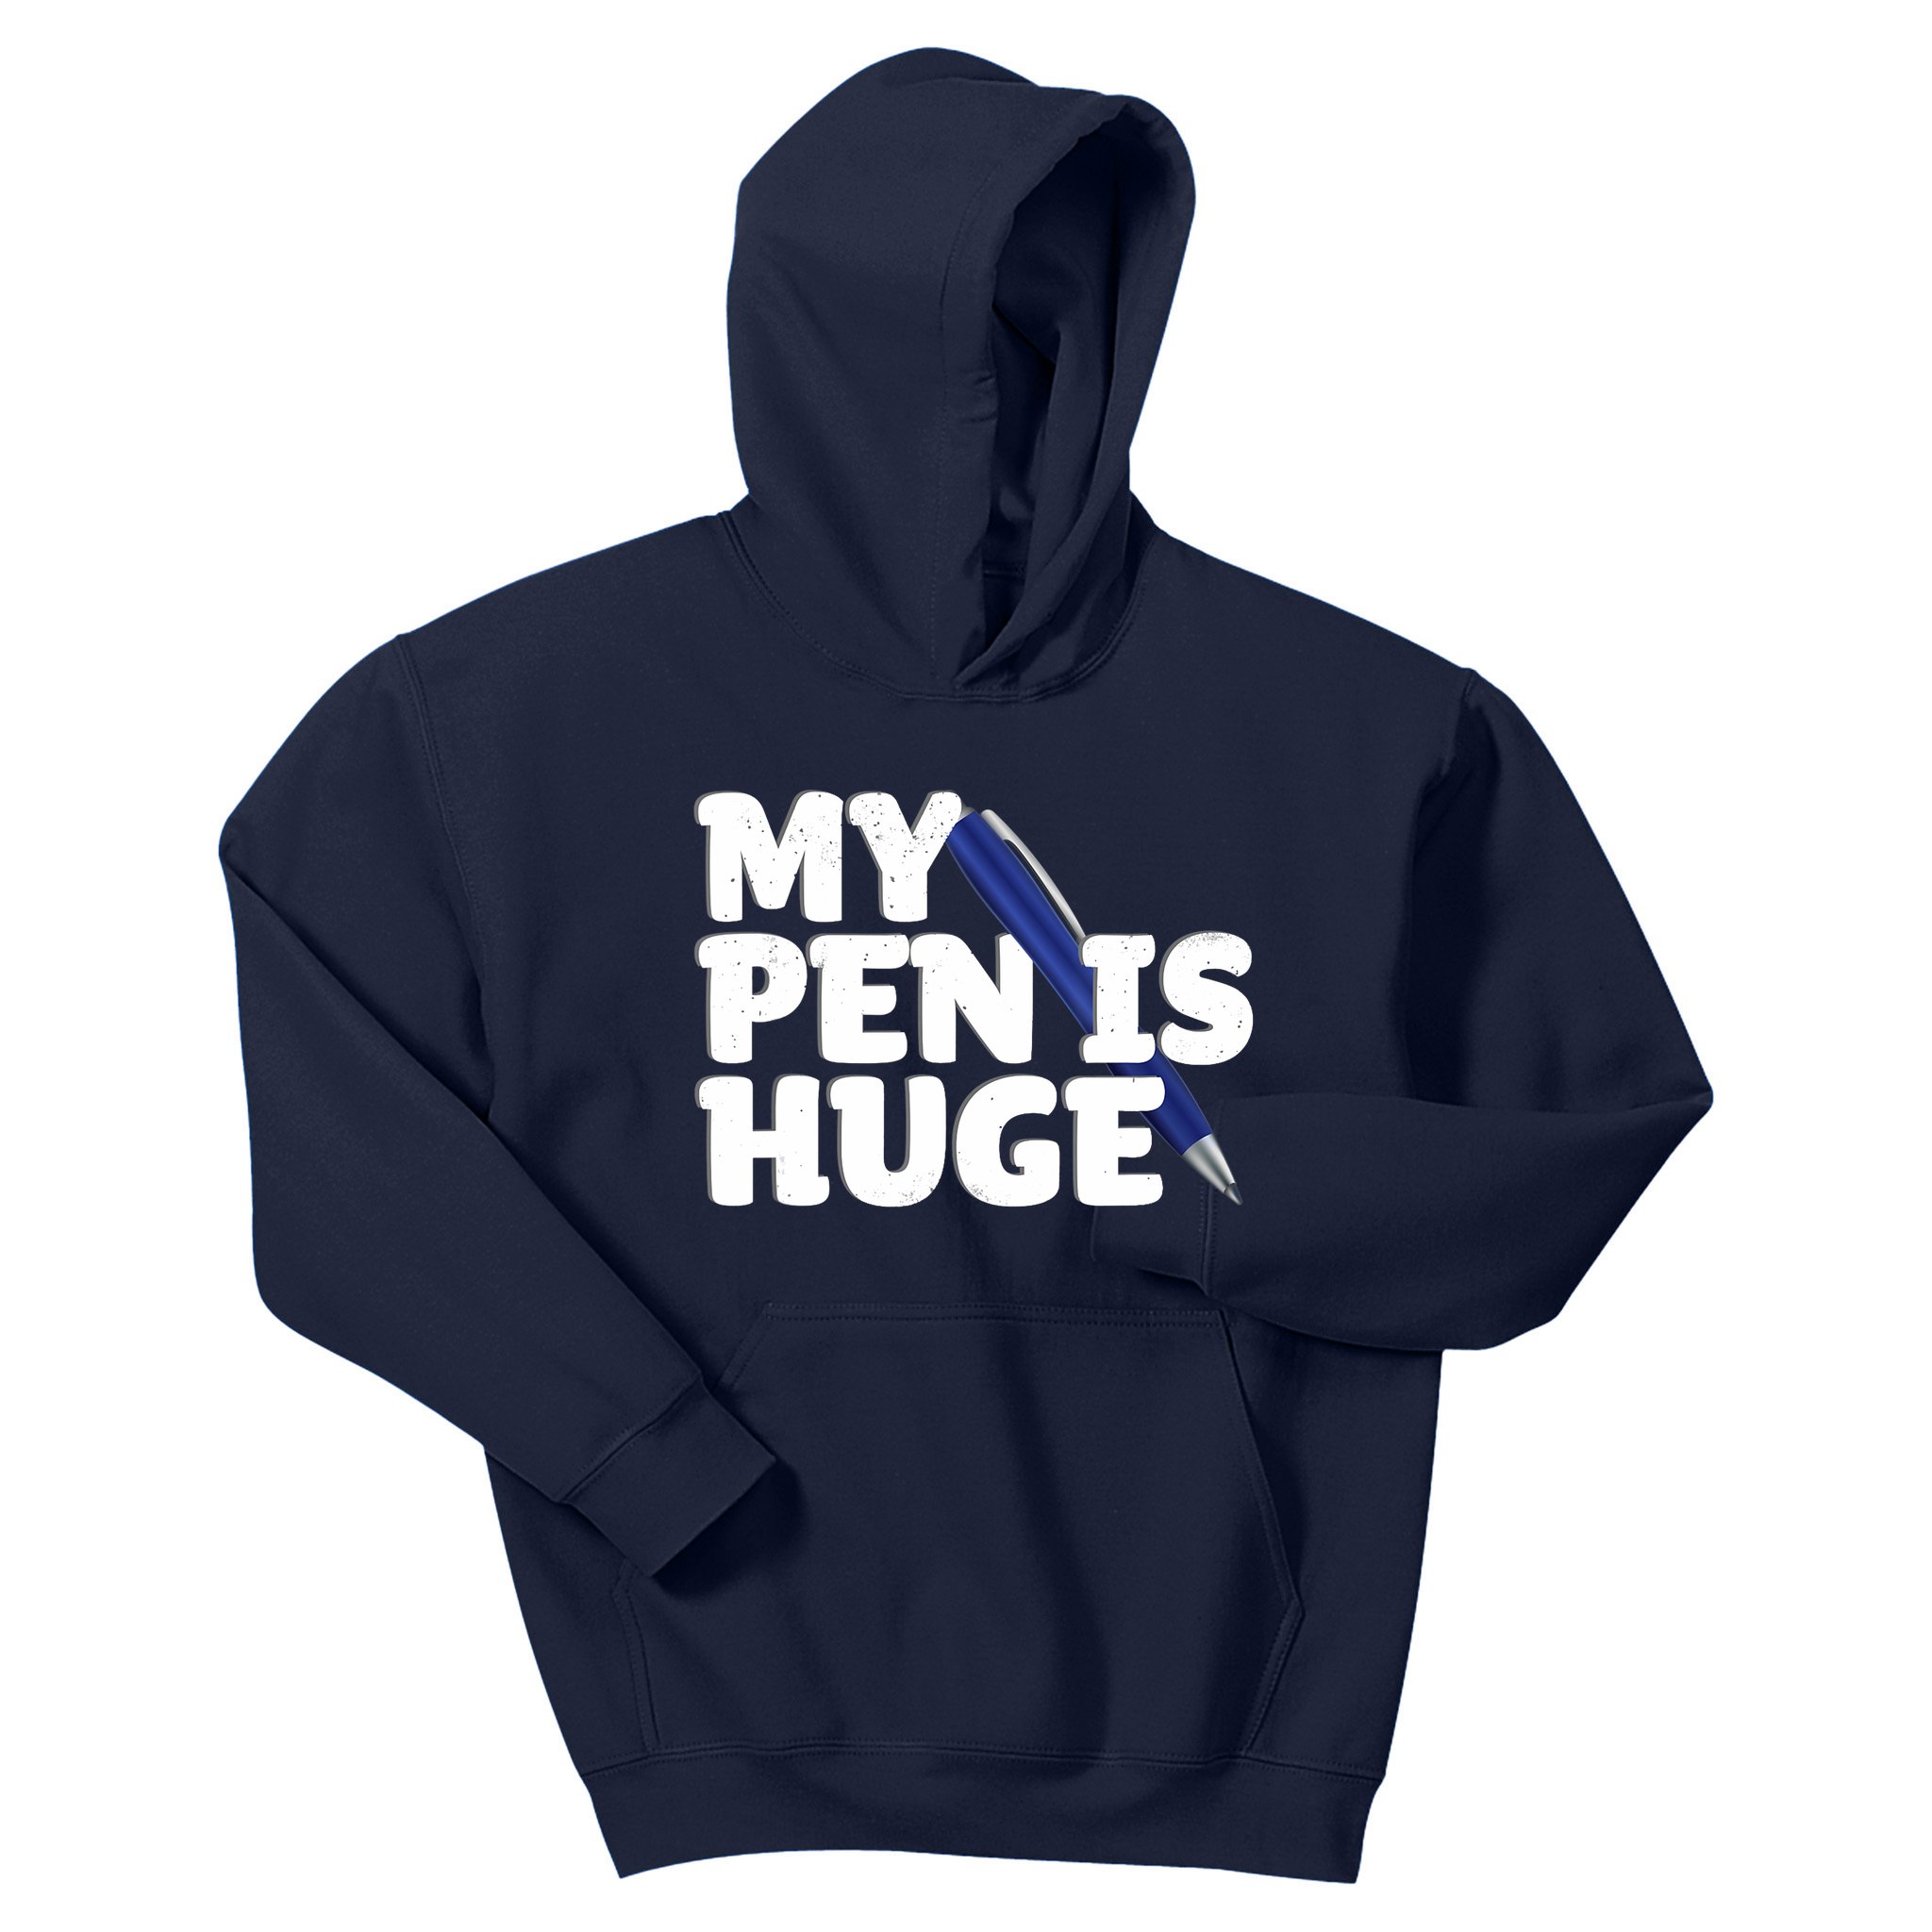 https://images3.teeshirtpalace.com/images/productImages/mpi6908671-my-pen-is-huge-adult-humor-inappropriate-dirty-joke--navy-yhd-garment.jpg